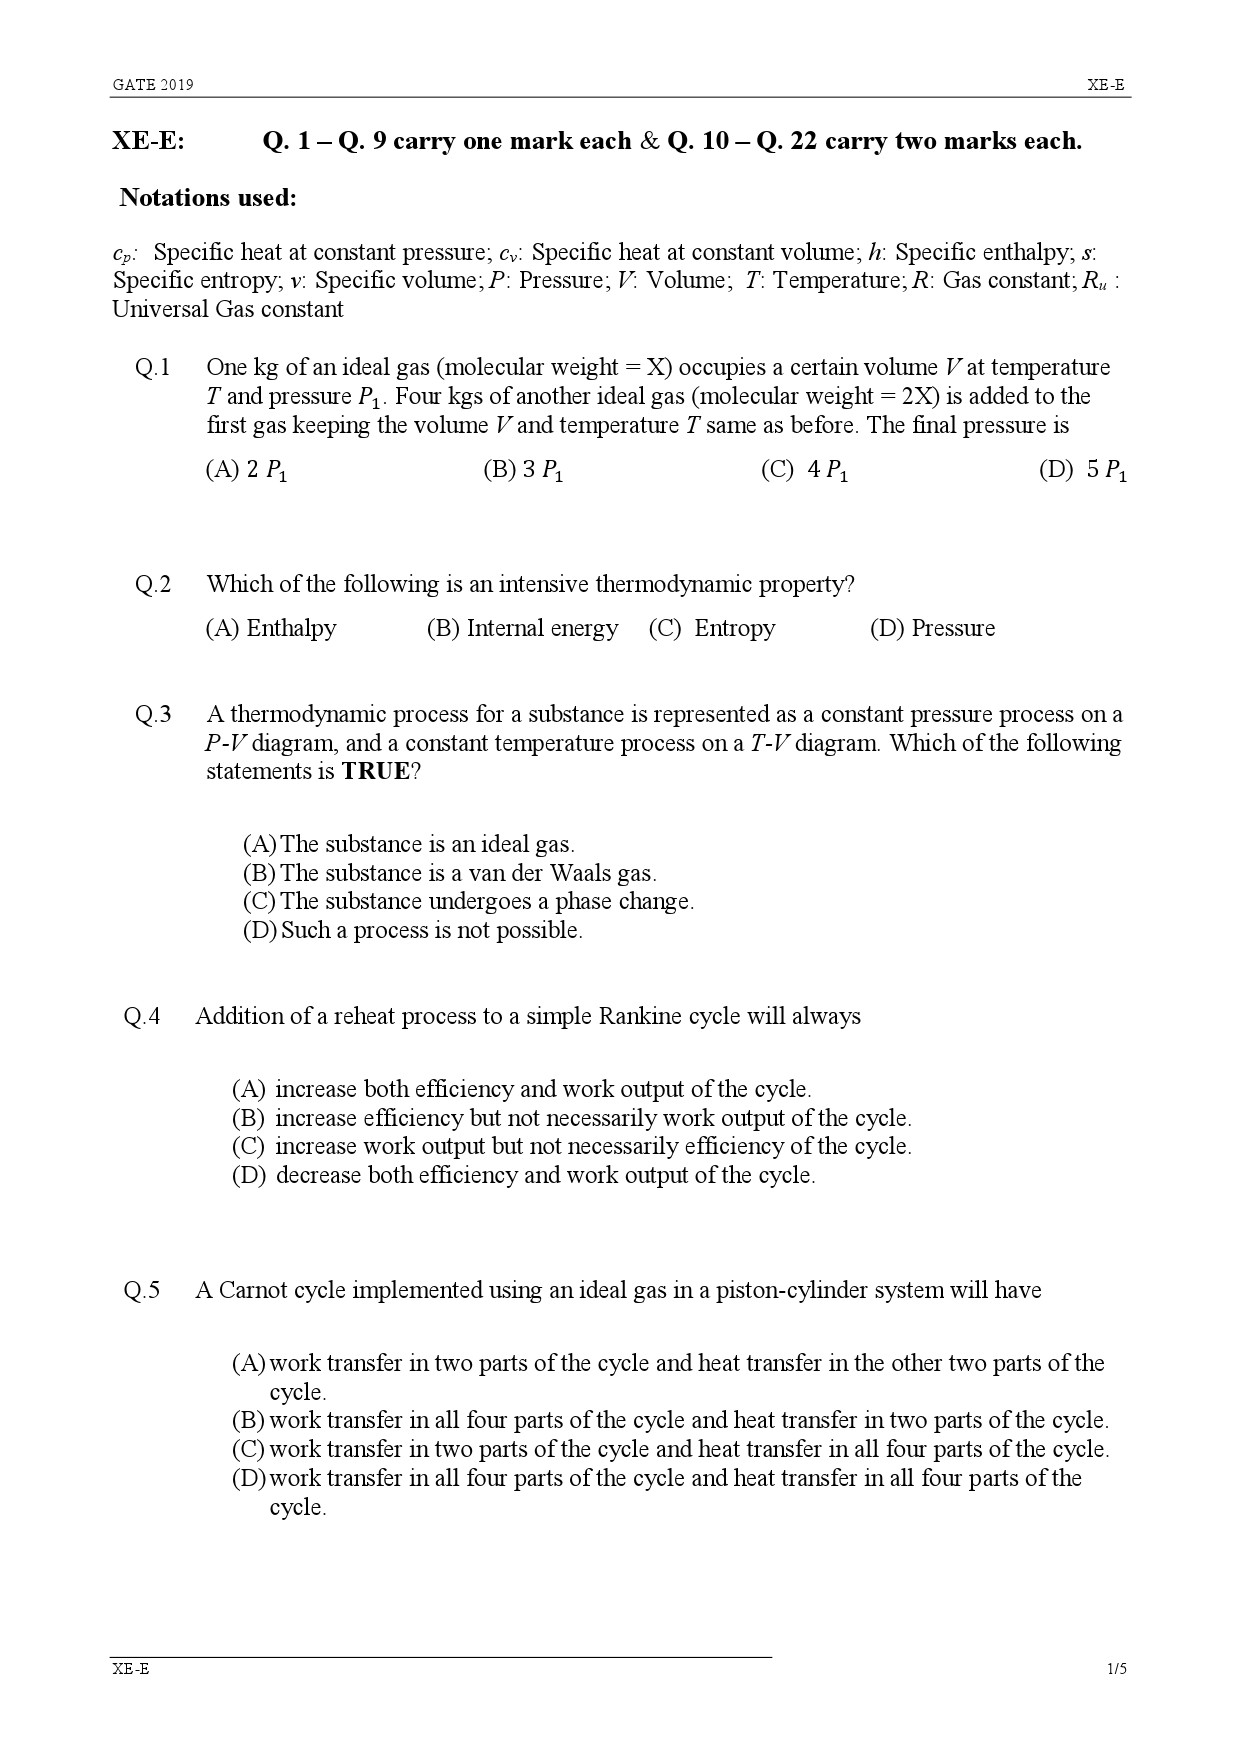 GATE Exam Question Paper 2019 Engineering Sciences 23